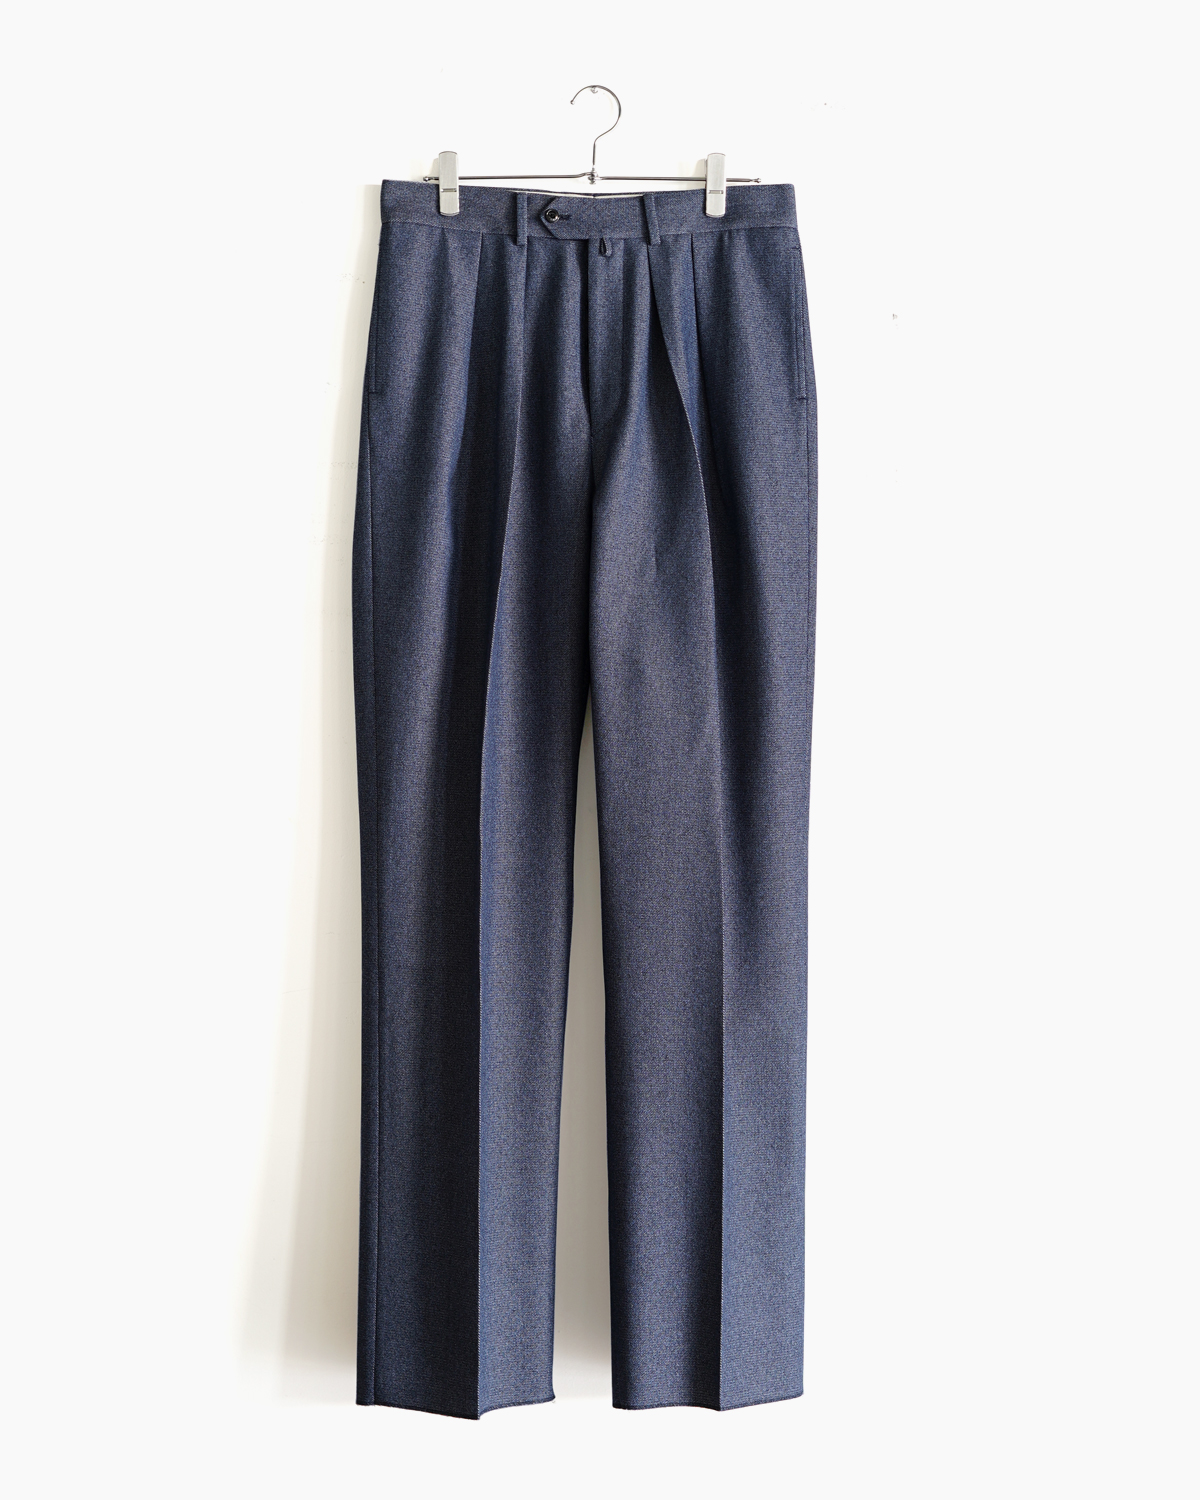 NEAT｜PLASTIC DENIM｜WIDE - Blue｜PRODUCT｜Continuer Inc.｜メガネ 